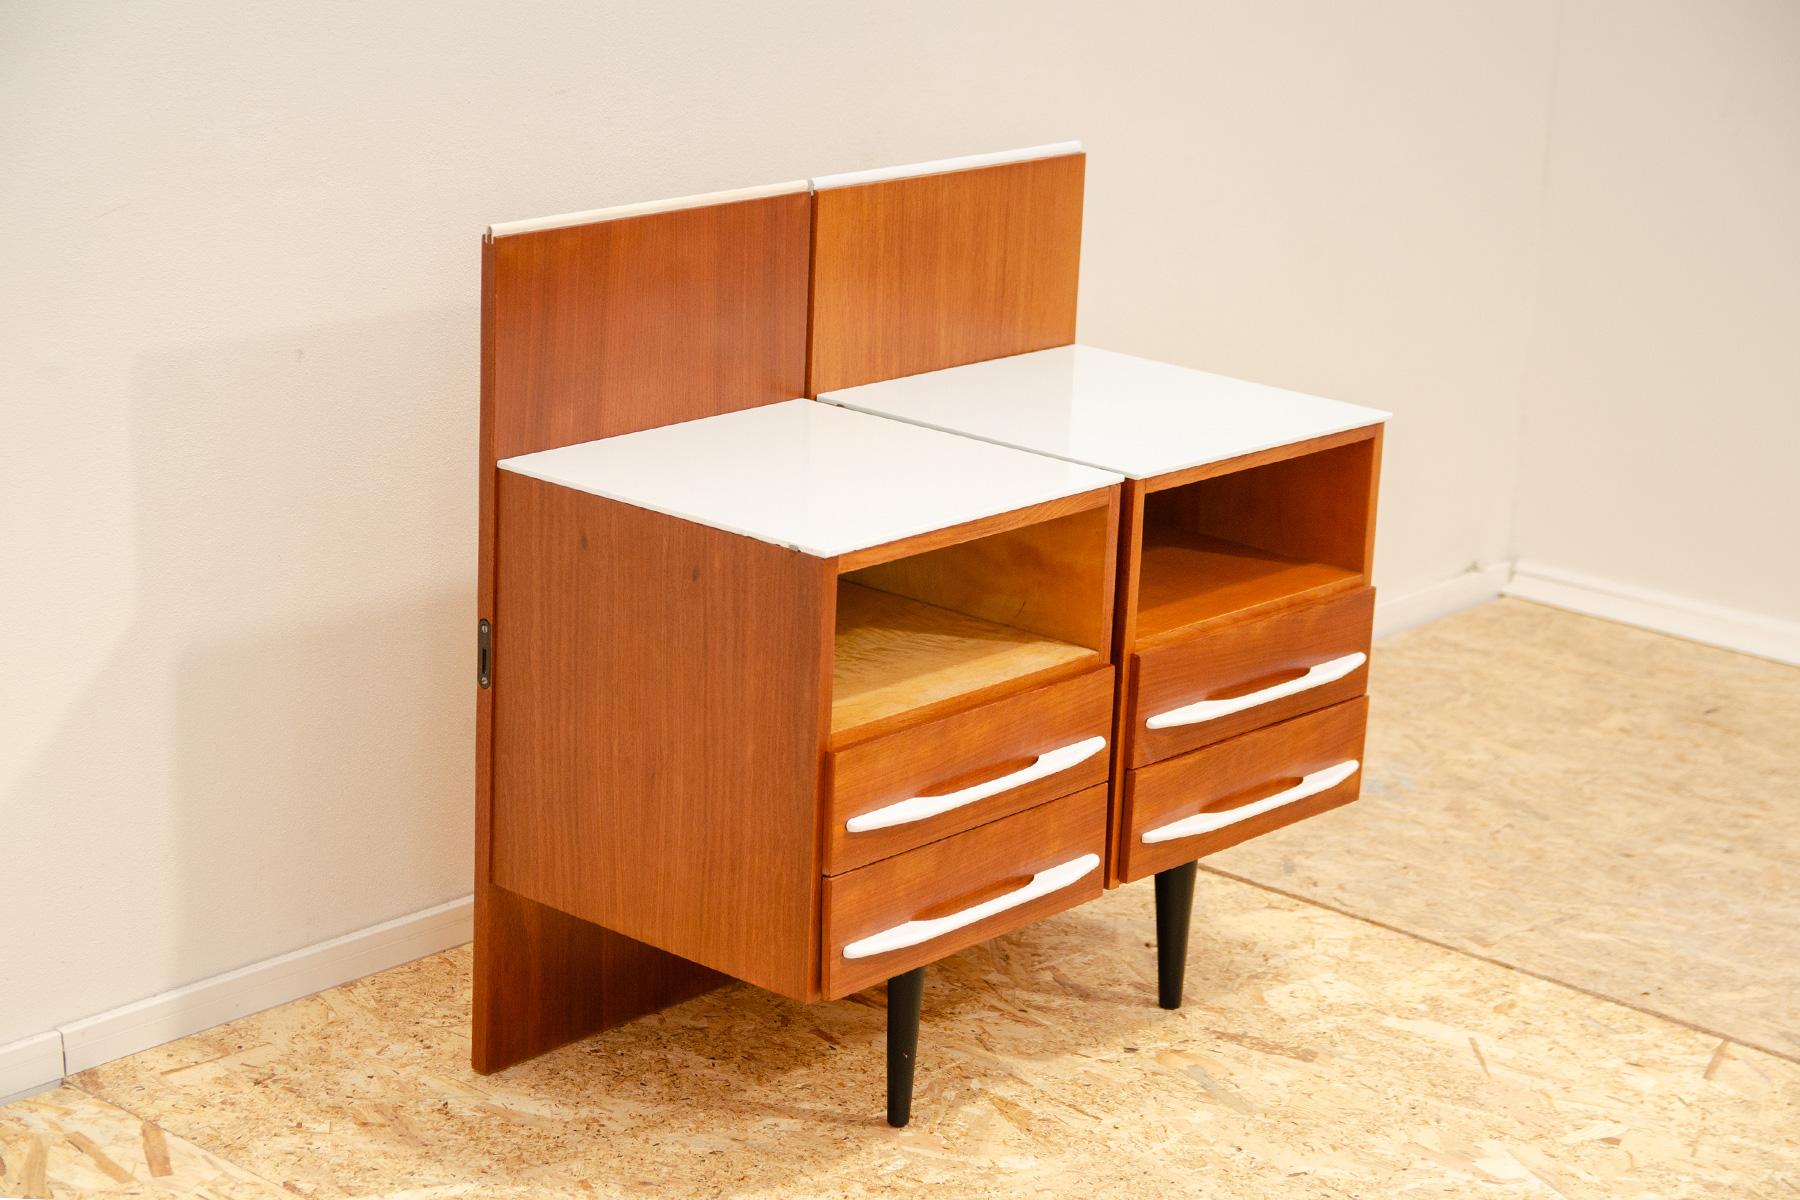 These nightstands/bedside tables were designed by Mojmír Požár for UP Závody and made in the former Czechoslovakia in the 1960´s. Made of beech wood with white glas on the top.
In excellent condition, fully renovated.

Price is for the